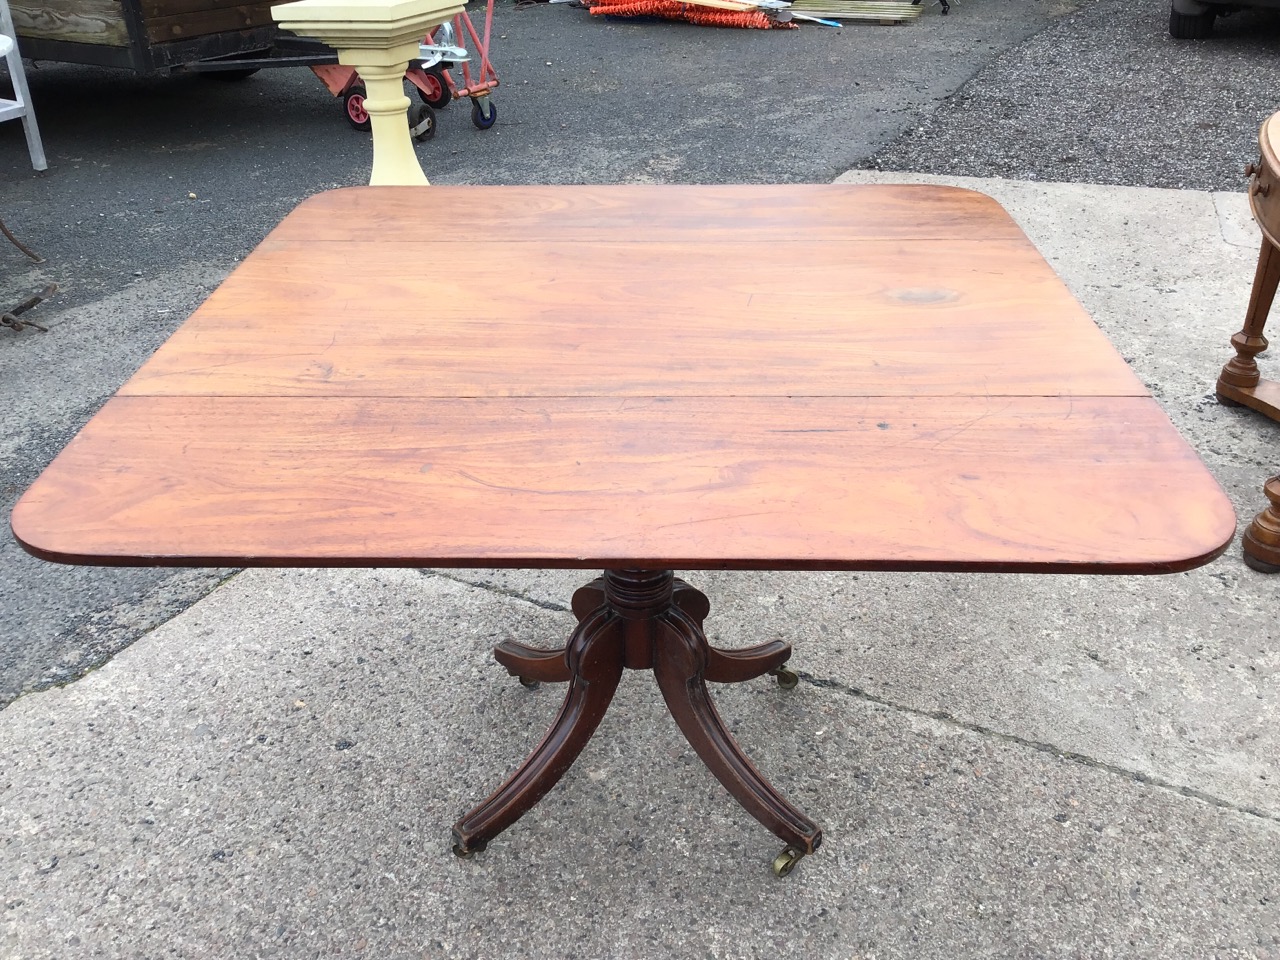 A regency mahogany dining table with rounded rectangular top and two leaves supported on brackets - Image 2 of 3